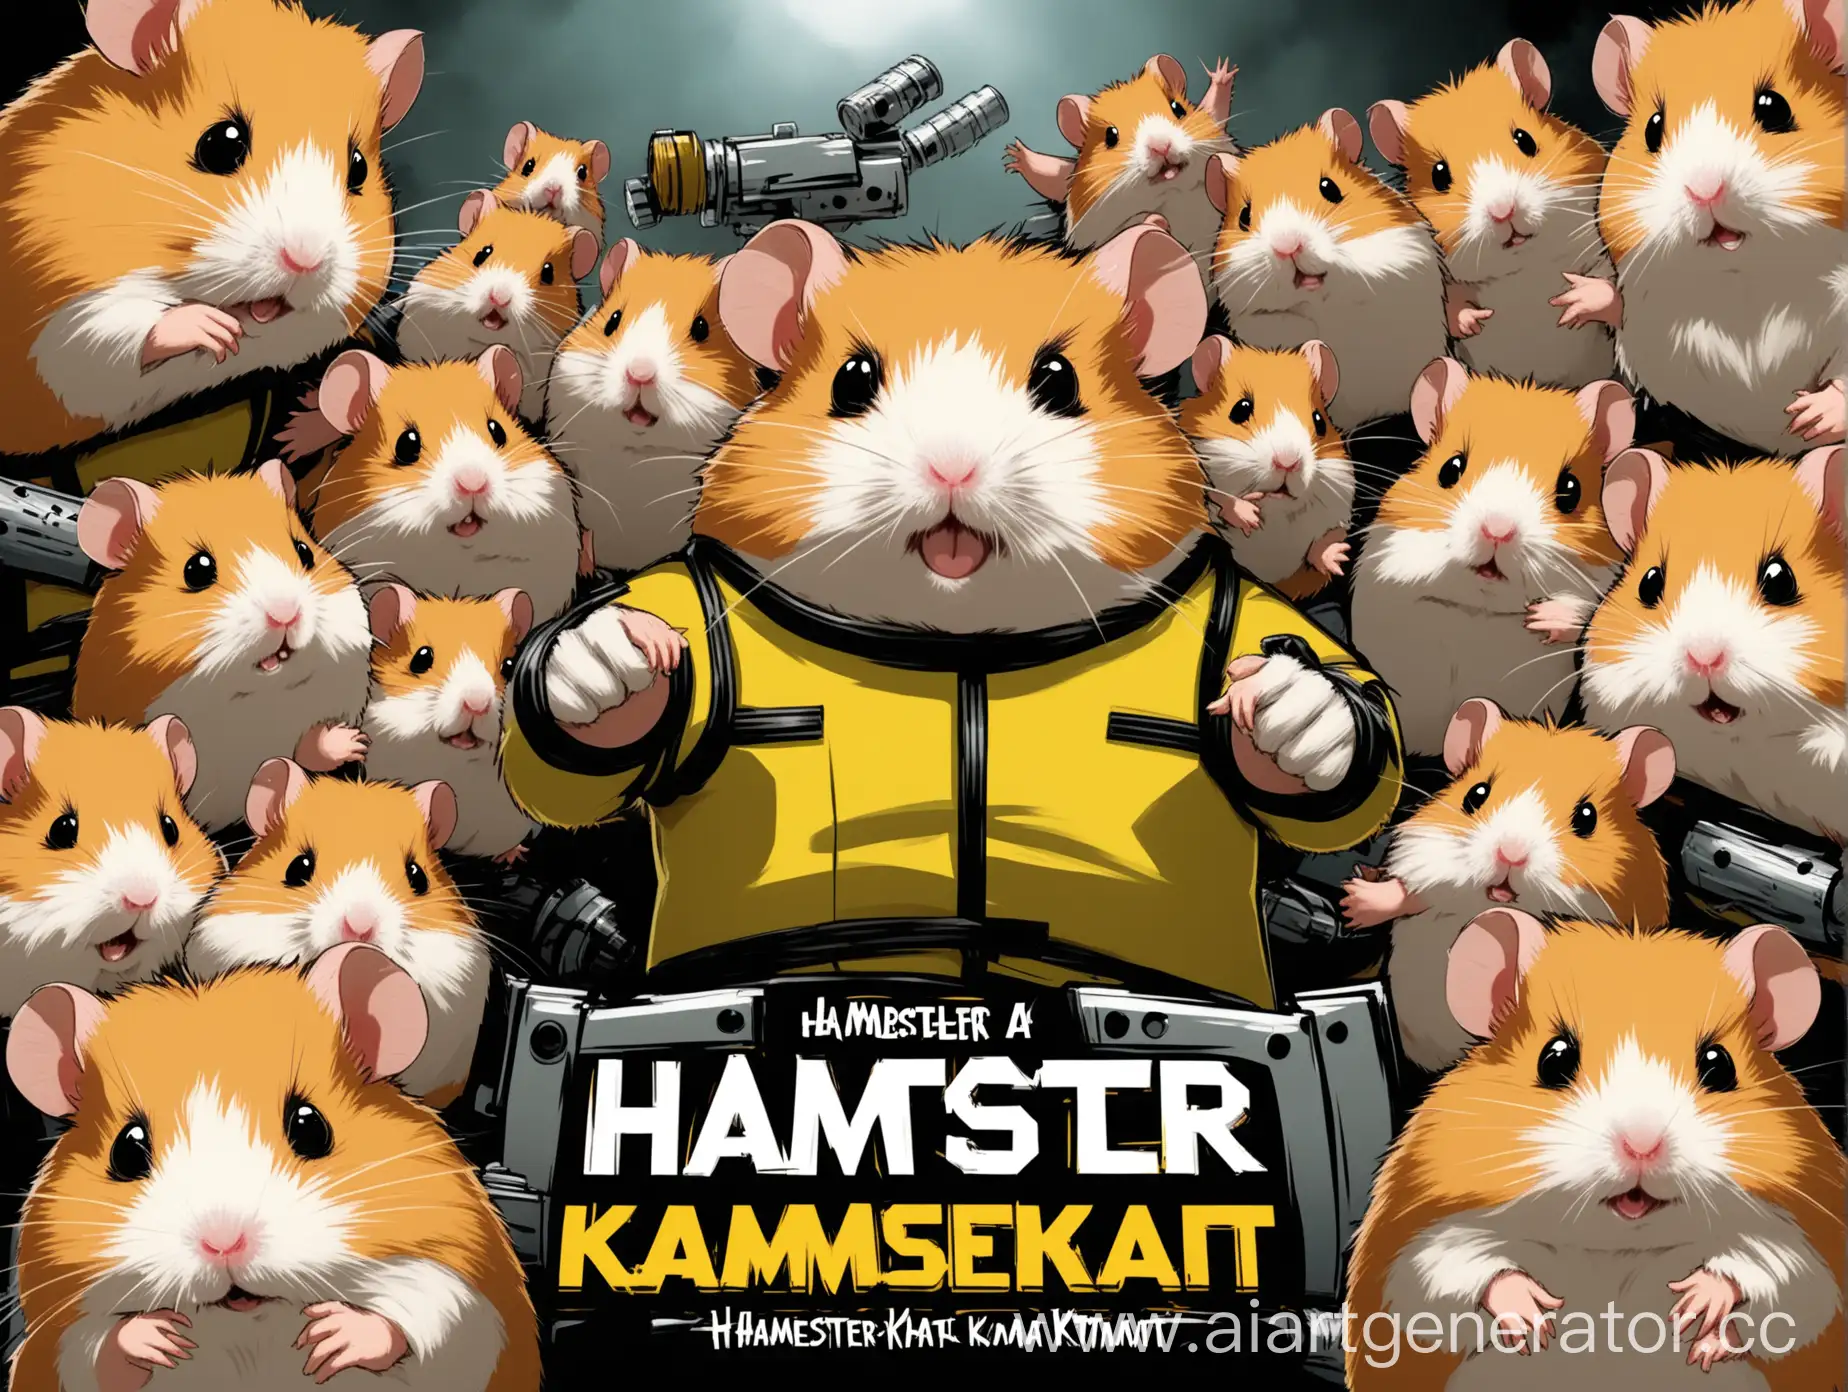 Epic-Adventure-of-Hamster-Kombat-A-Cinematic-Journey-with-a-Brave-Hamster